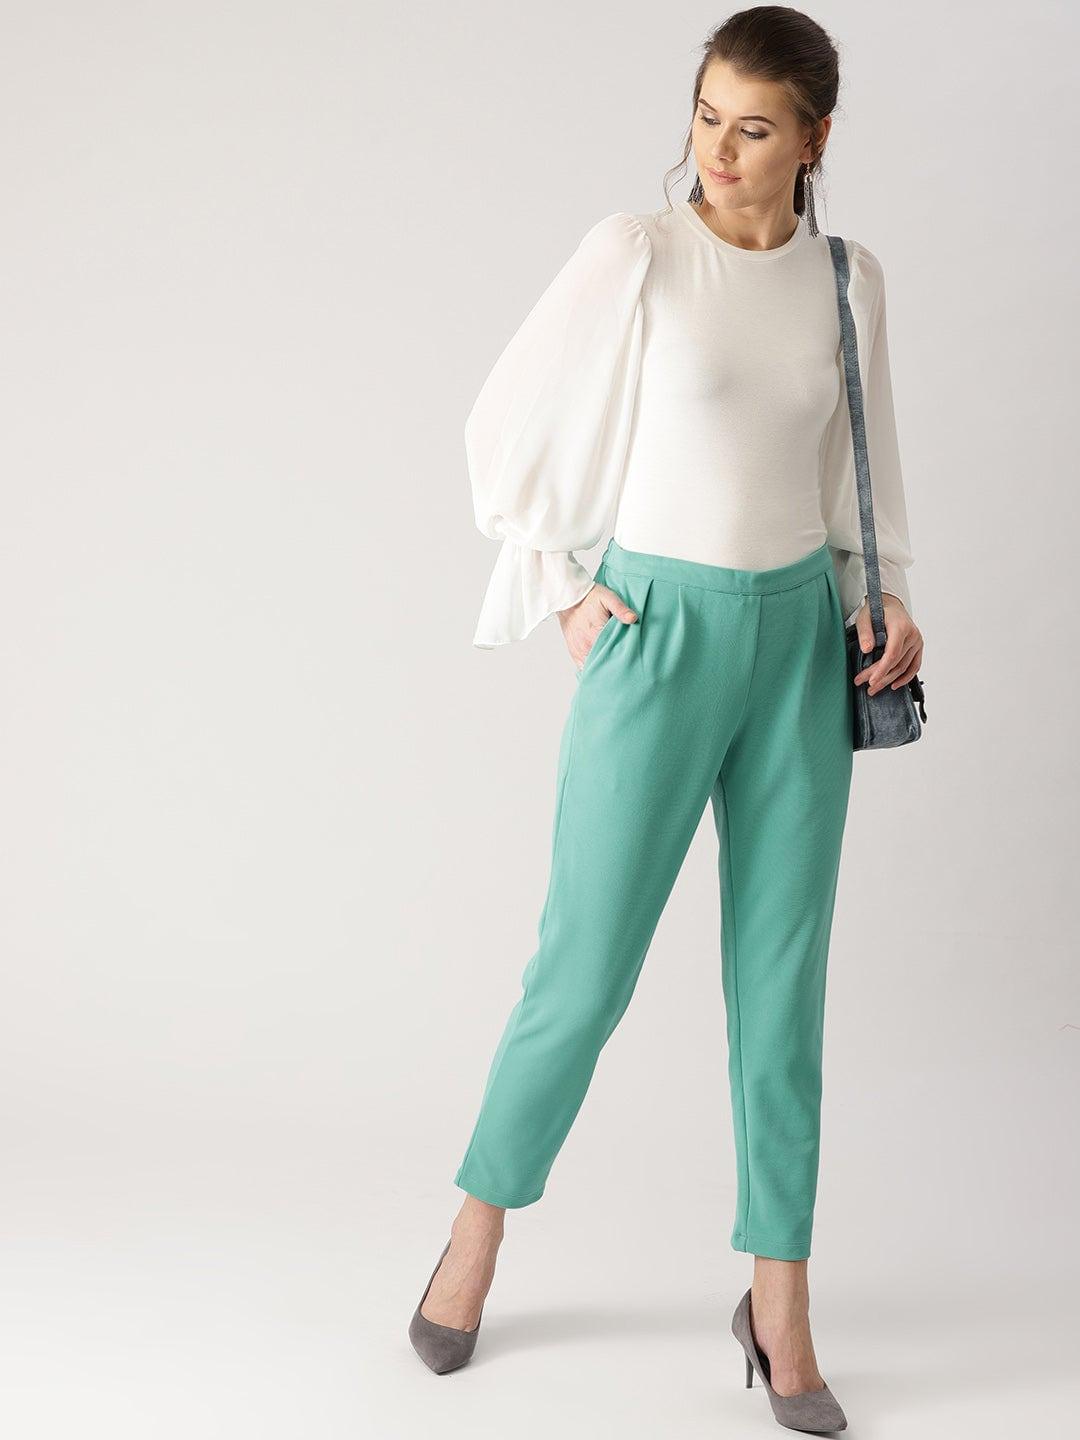 Green Solid Polyester Trousers - Libas